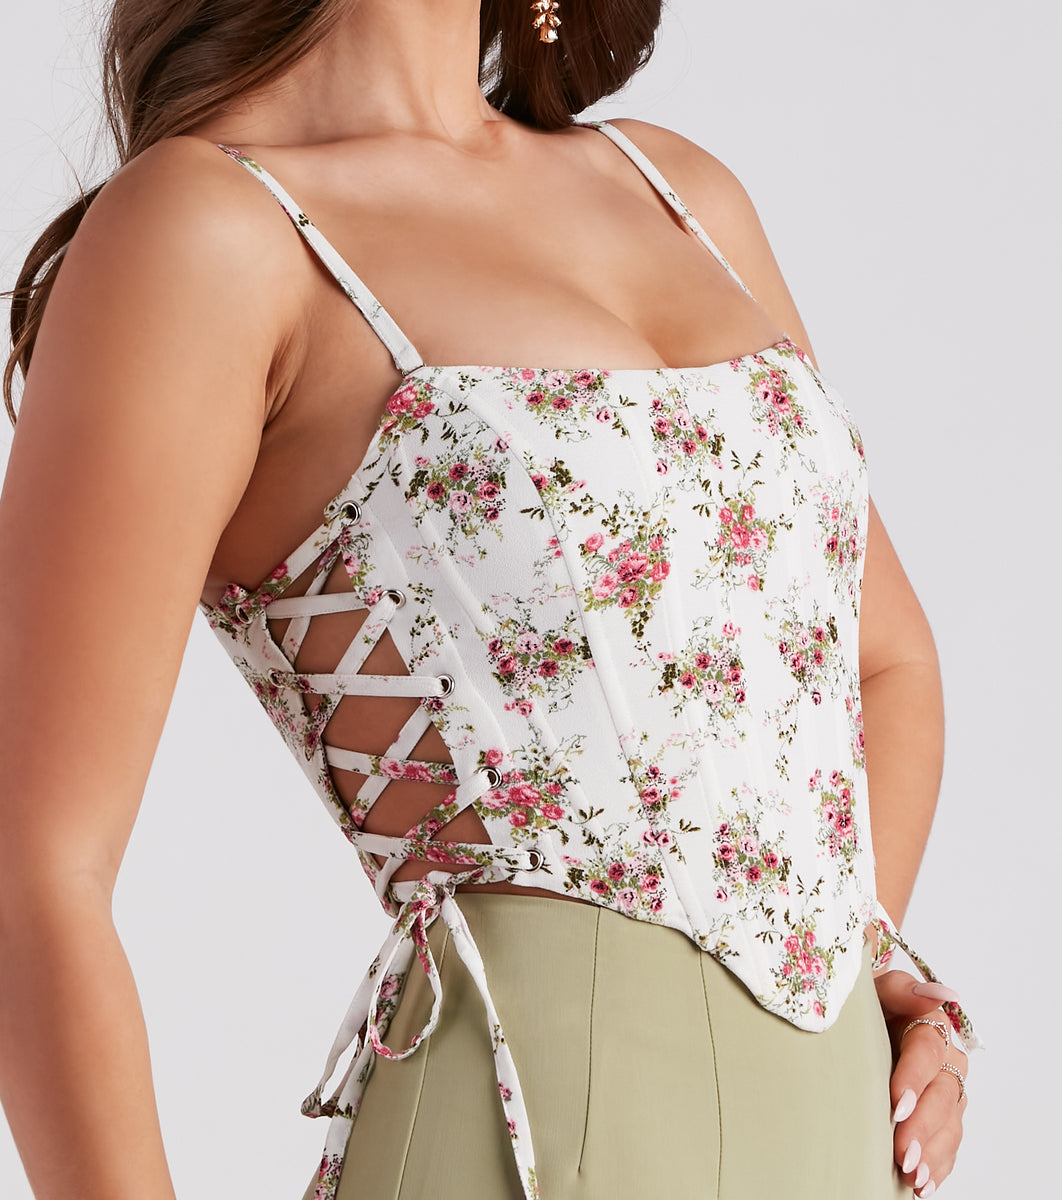 Windsor Reigning Lace Bustier Top